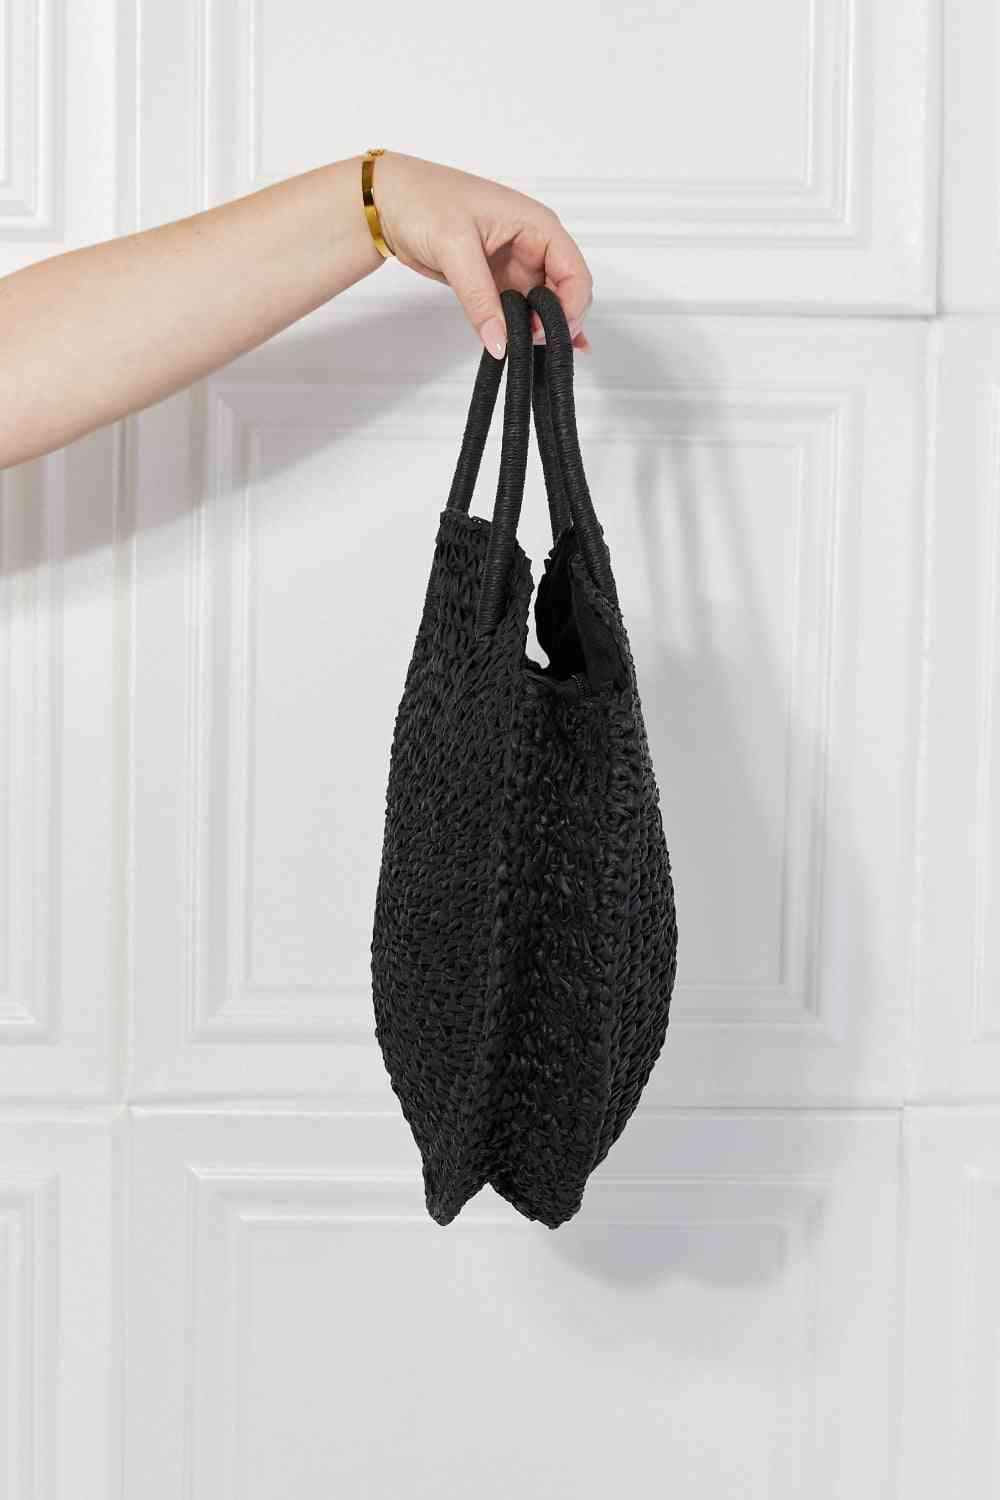 Justin Taylor Beach Date Straw Rattan Handbag in Black at Kamakhyaa by Trendsi. This item is Bags, Justin Taylor, Ship from USA, Trendsi